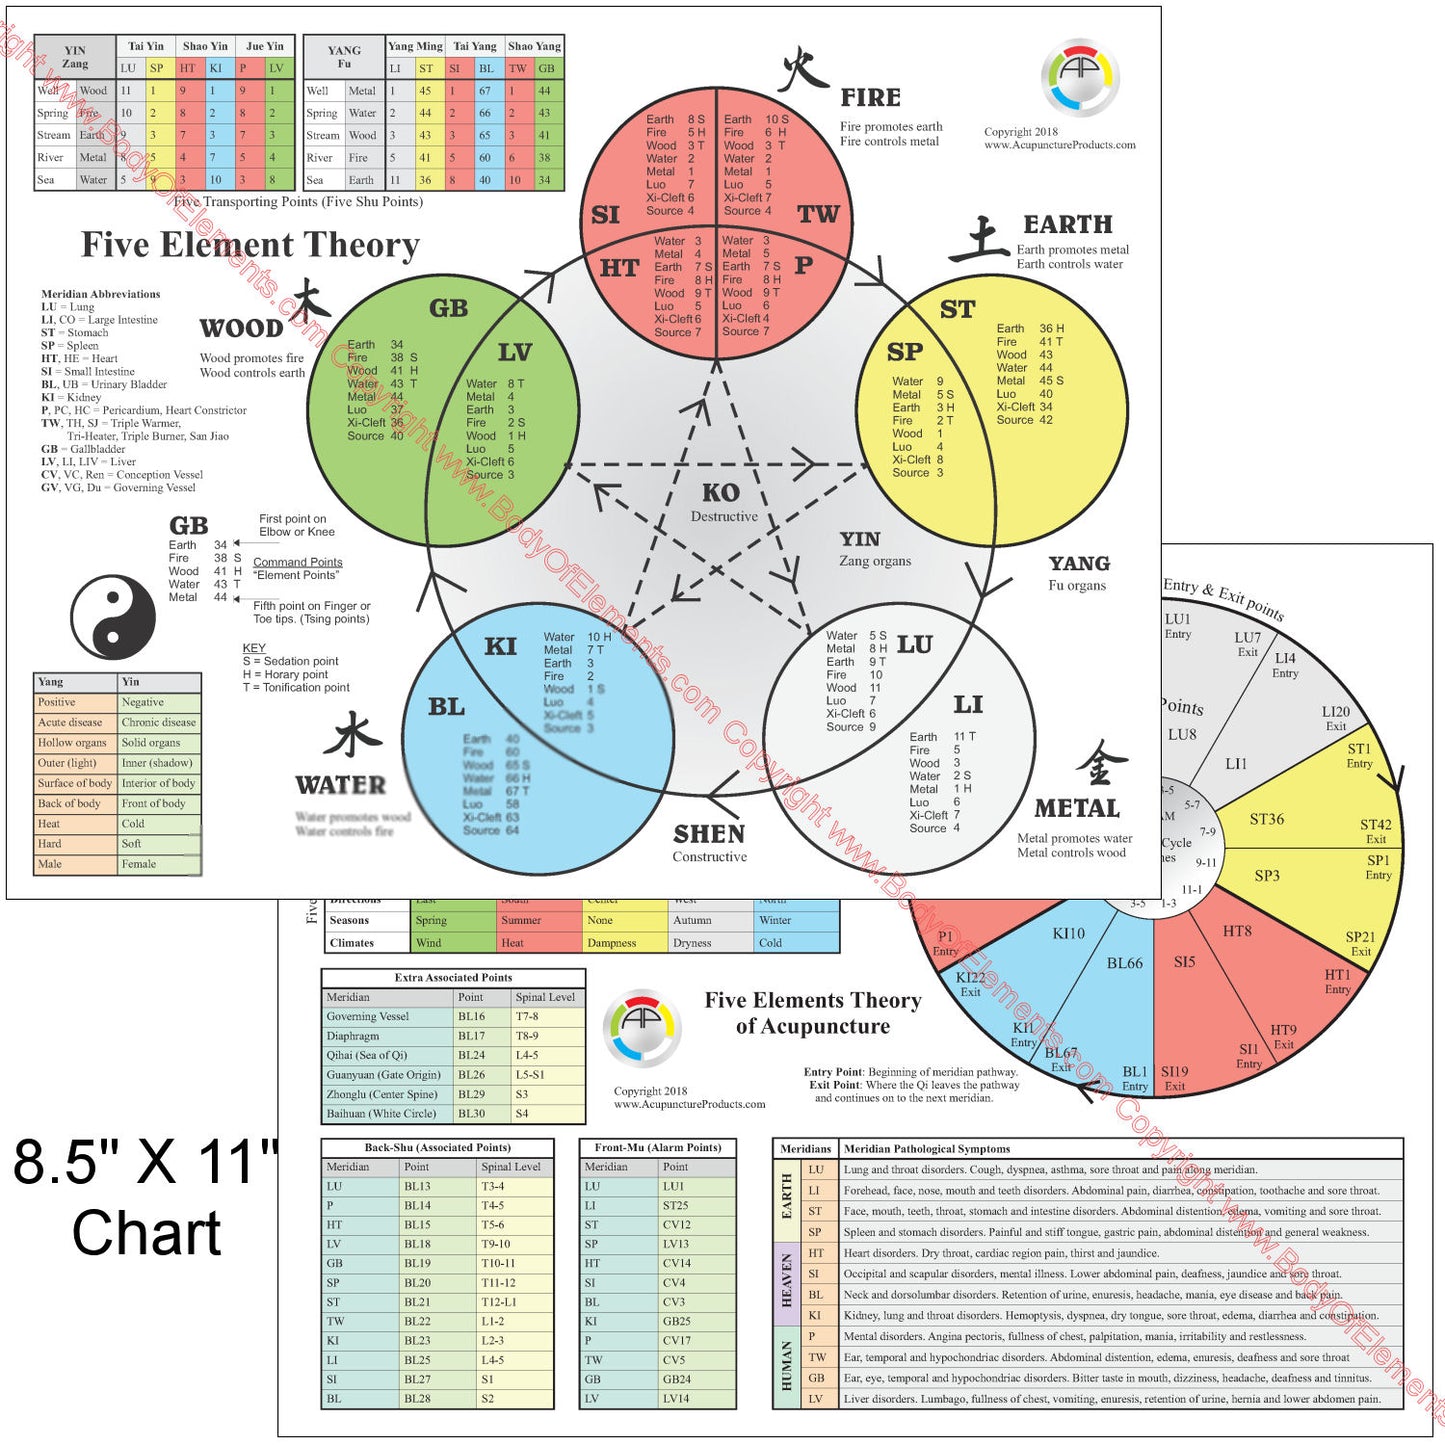 The Five Elements of Acupuncture Chart 8.5" X 11"